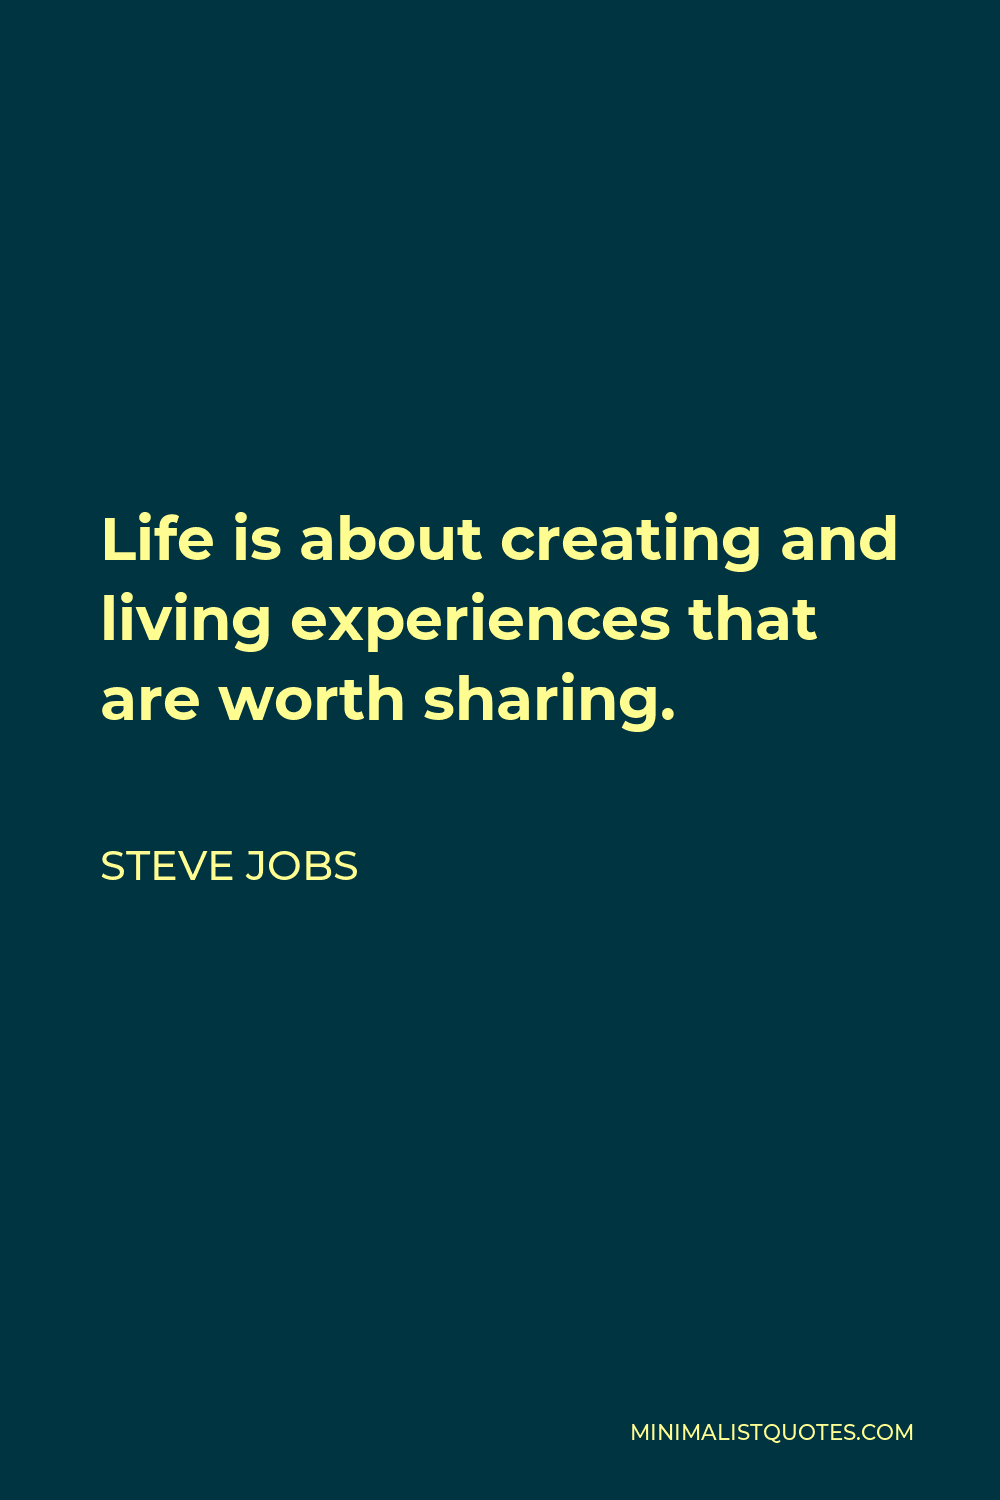 Steve Jobs Quote - Life is about creating and living experiences that are worth sharing.